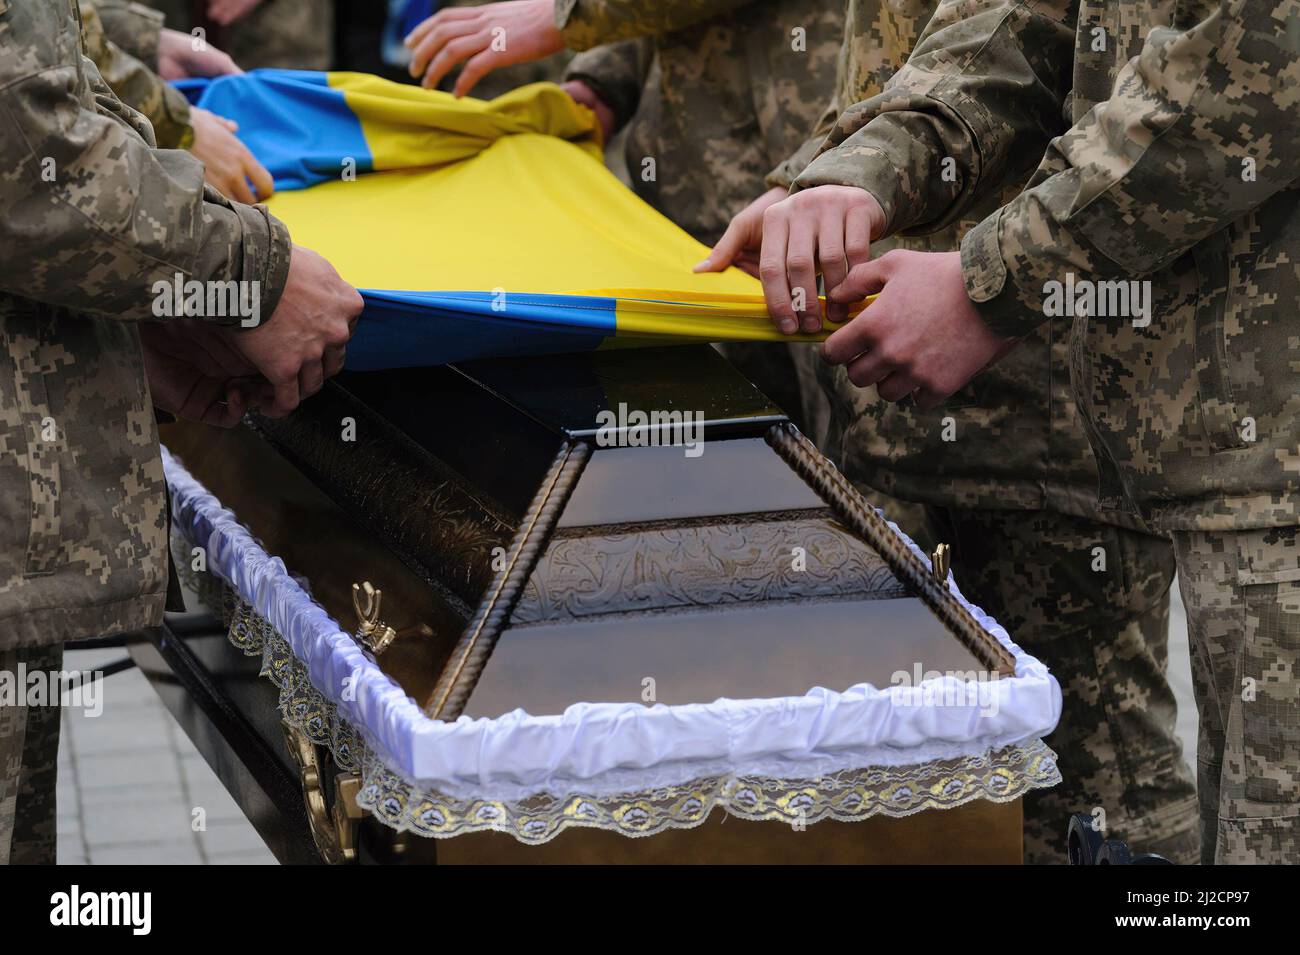 Lviv, Ukraine. 31st Mar, 2022. Ukrainian servicemen covering the coffin with Ukrainian flag during the burial. Funeral ceremony of 3 Ukrainian soldiers Kozachenko Andriy, Sarkisyan Ihor, Oliynyk Yuriy killed by Russian forces amid the Russian invasion in Lviv. (Credit Image: © Mykola Tys/SOPA Images via ZUMA Press Wire) Stock Photo